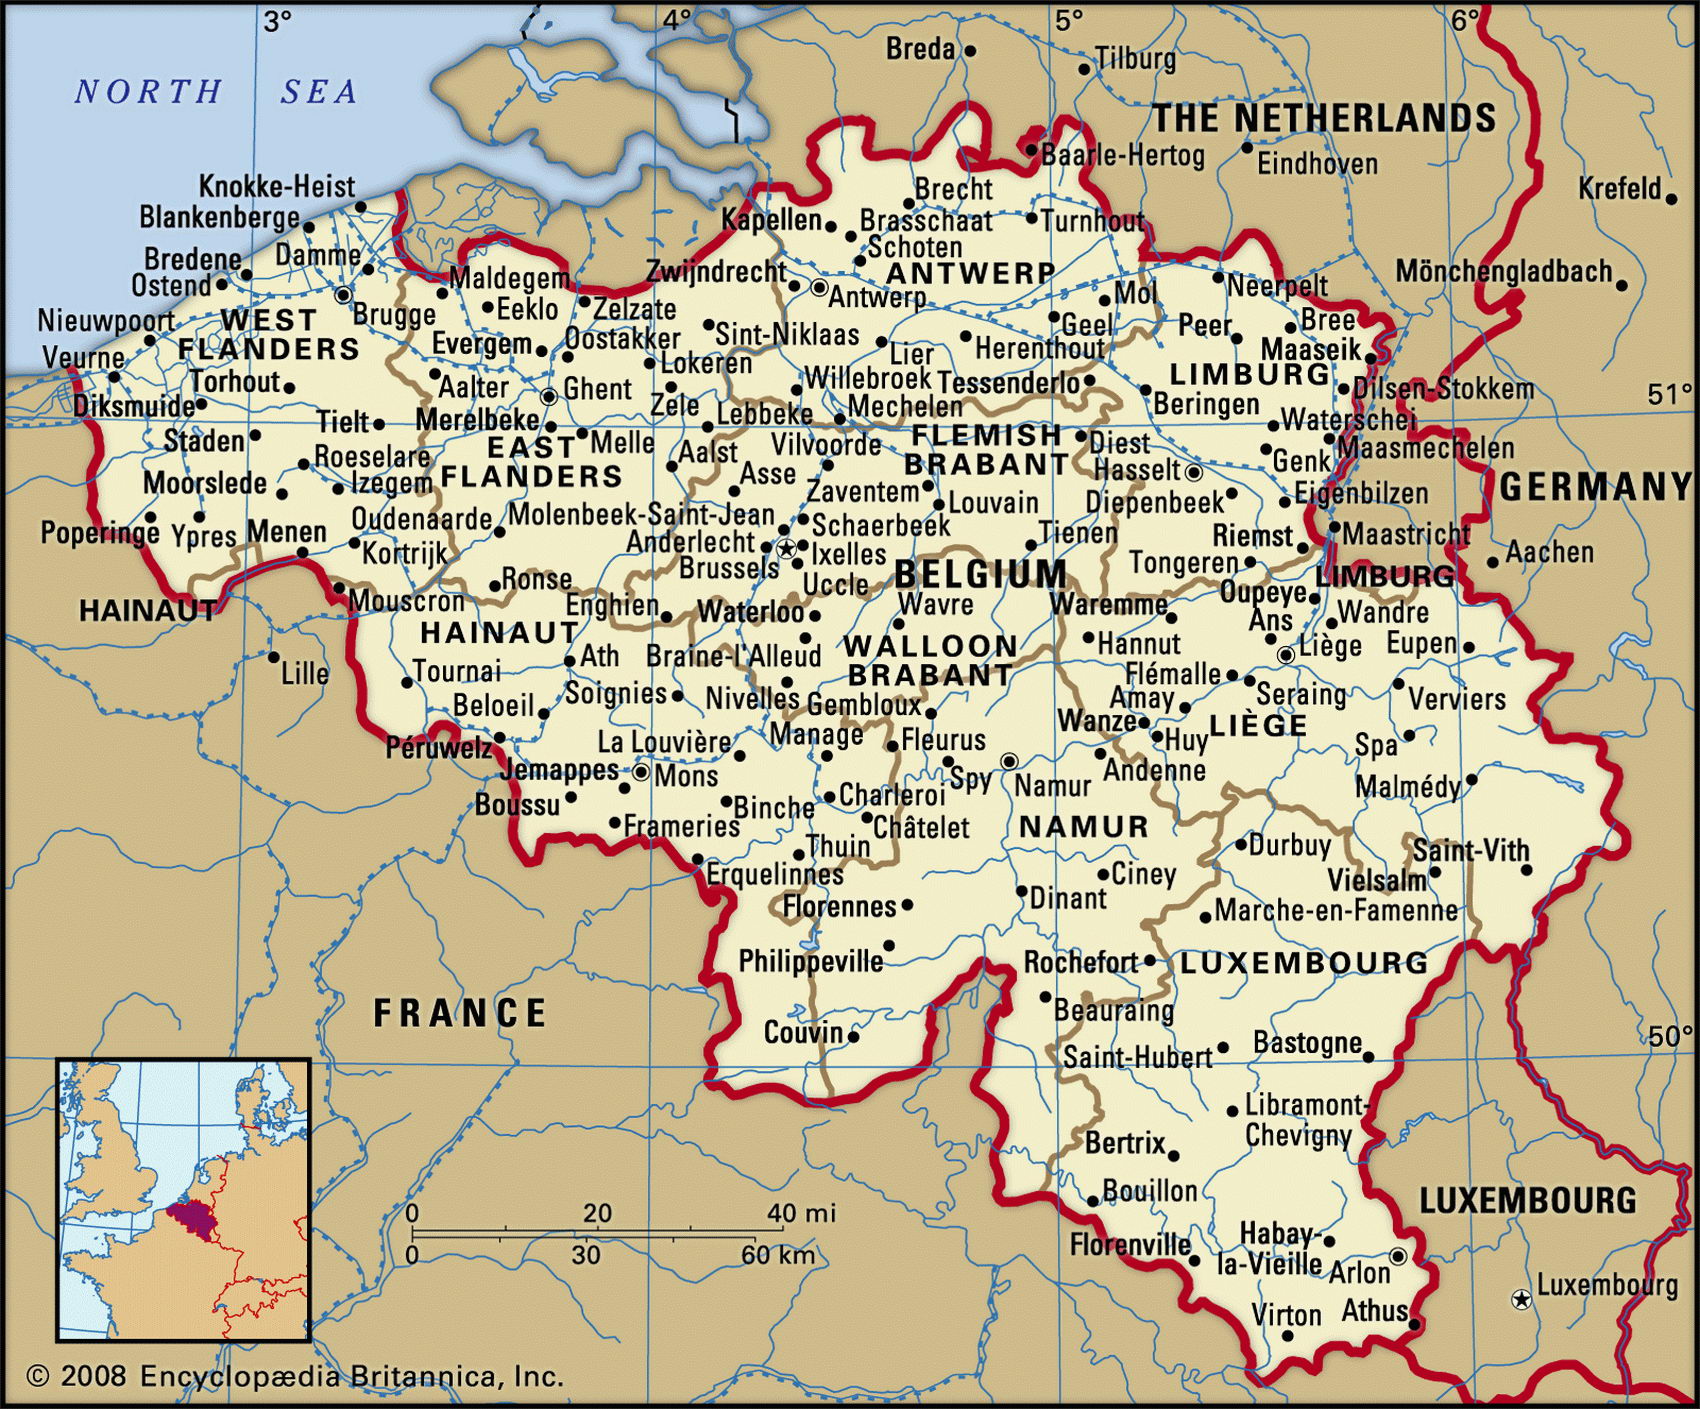 belgium-geographical-facts-map-of-belgium-with-cities-belgium-on-the-world-map-world-atlas